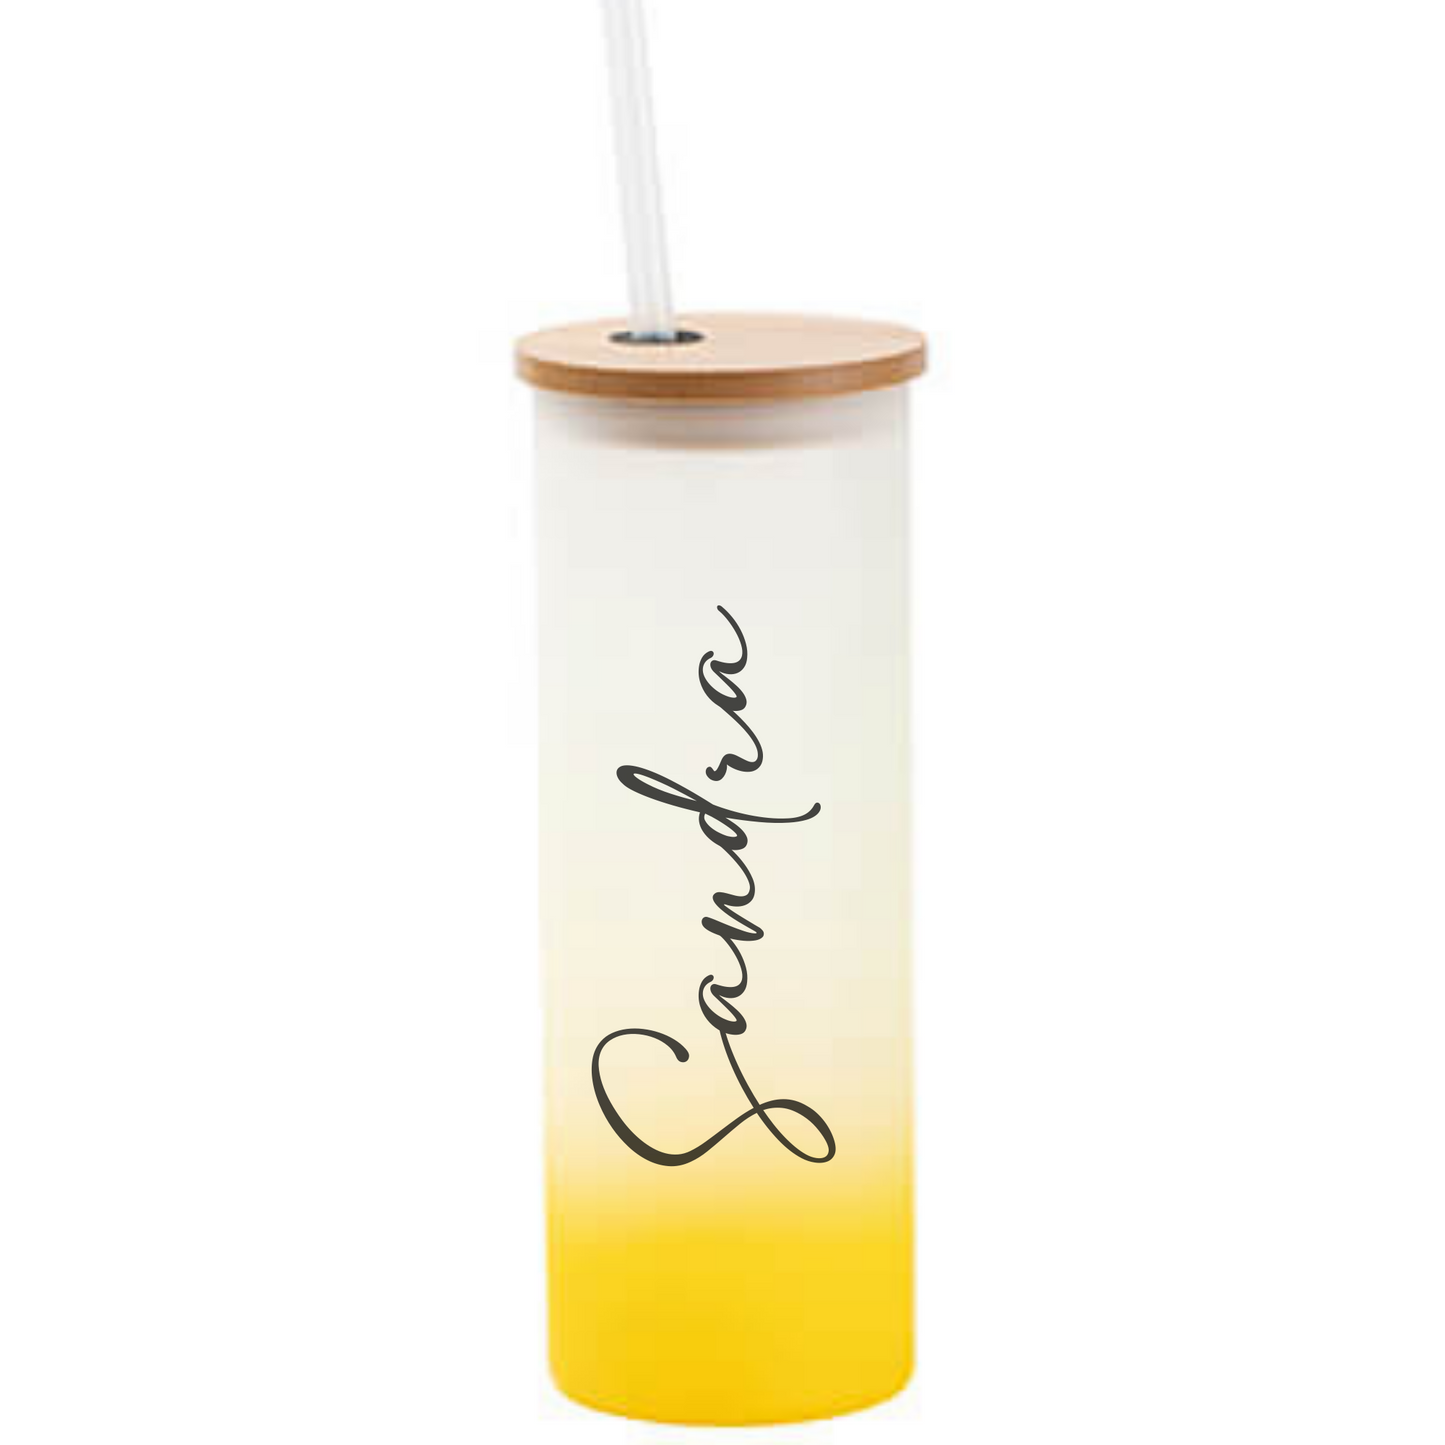 Drinking glass frosted personalized in 4 colors - tumbler with name - cocktail glass with bamboo lid and straw - personalized gift